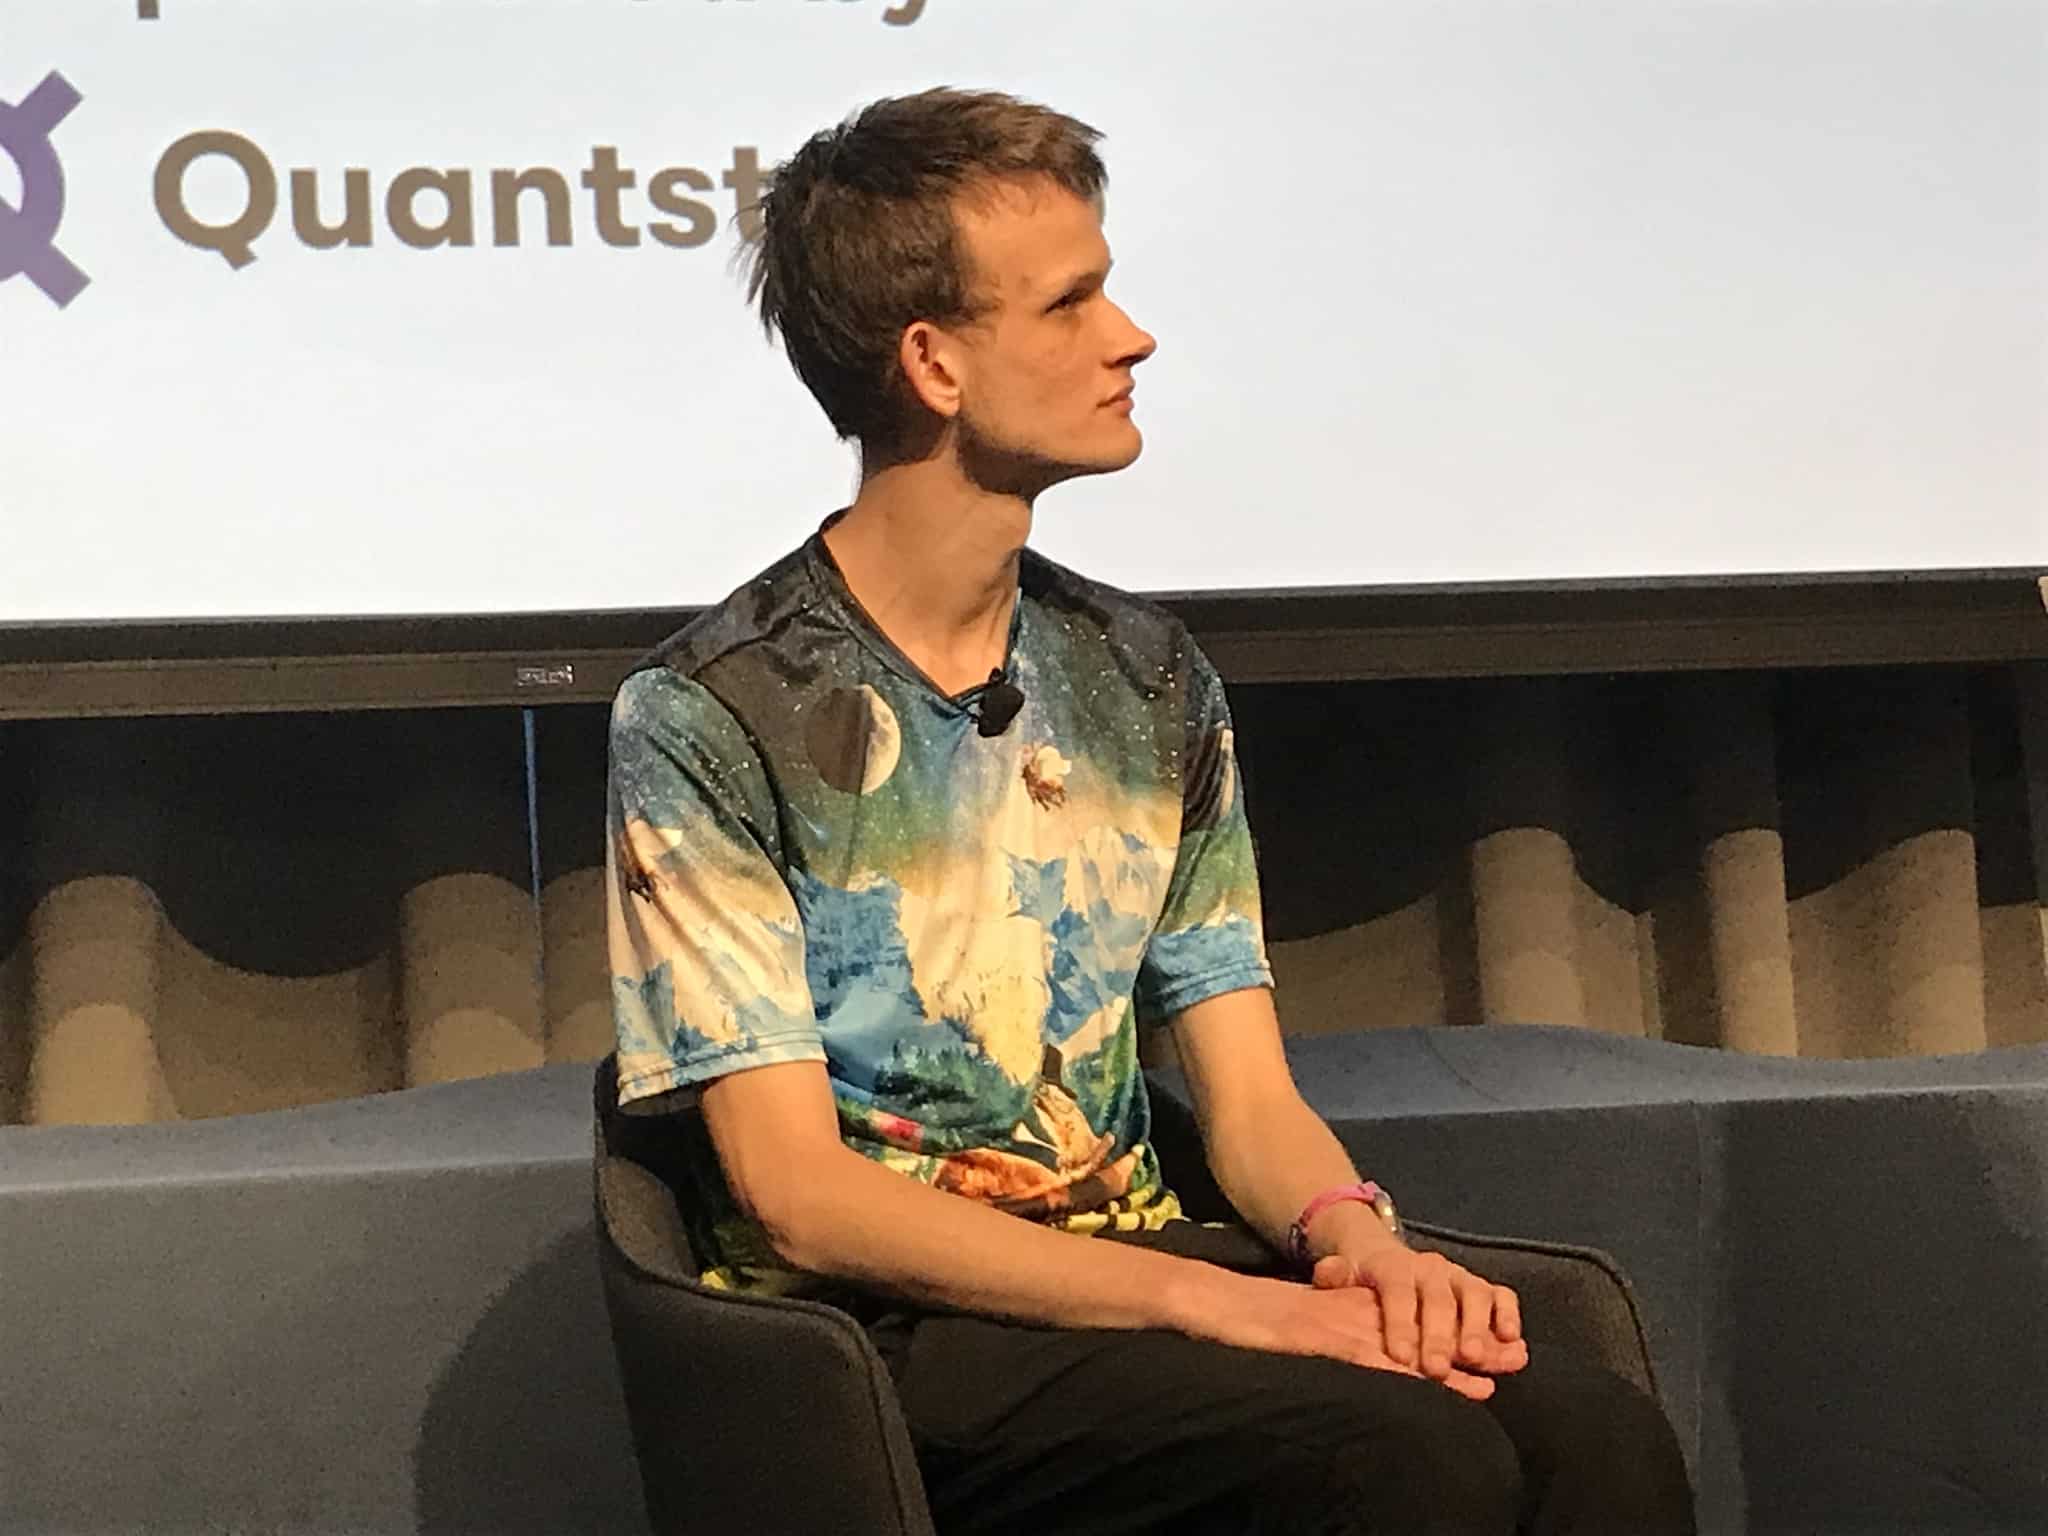 This Political Conversation With Vitalik Buterin Shows How Ethereum Could Change the World 1